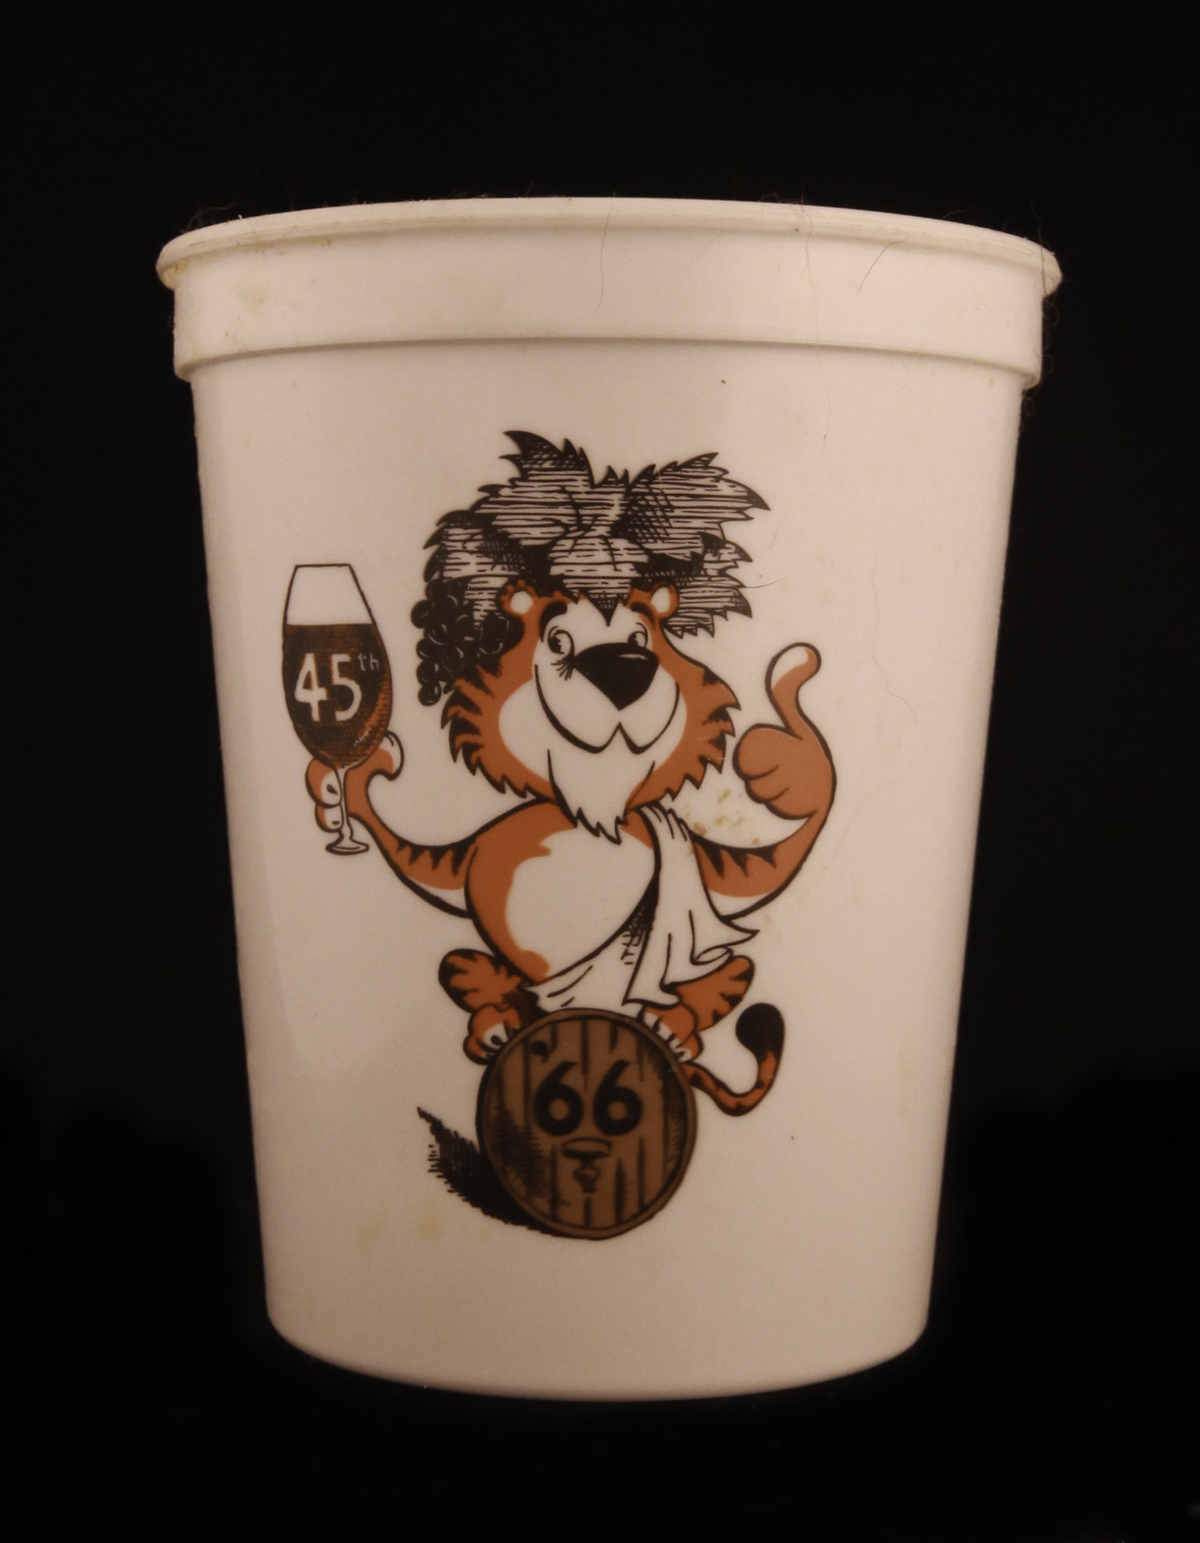 Beer Cup 1966 45th Reunion